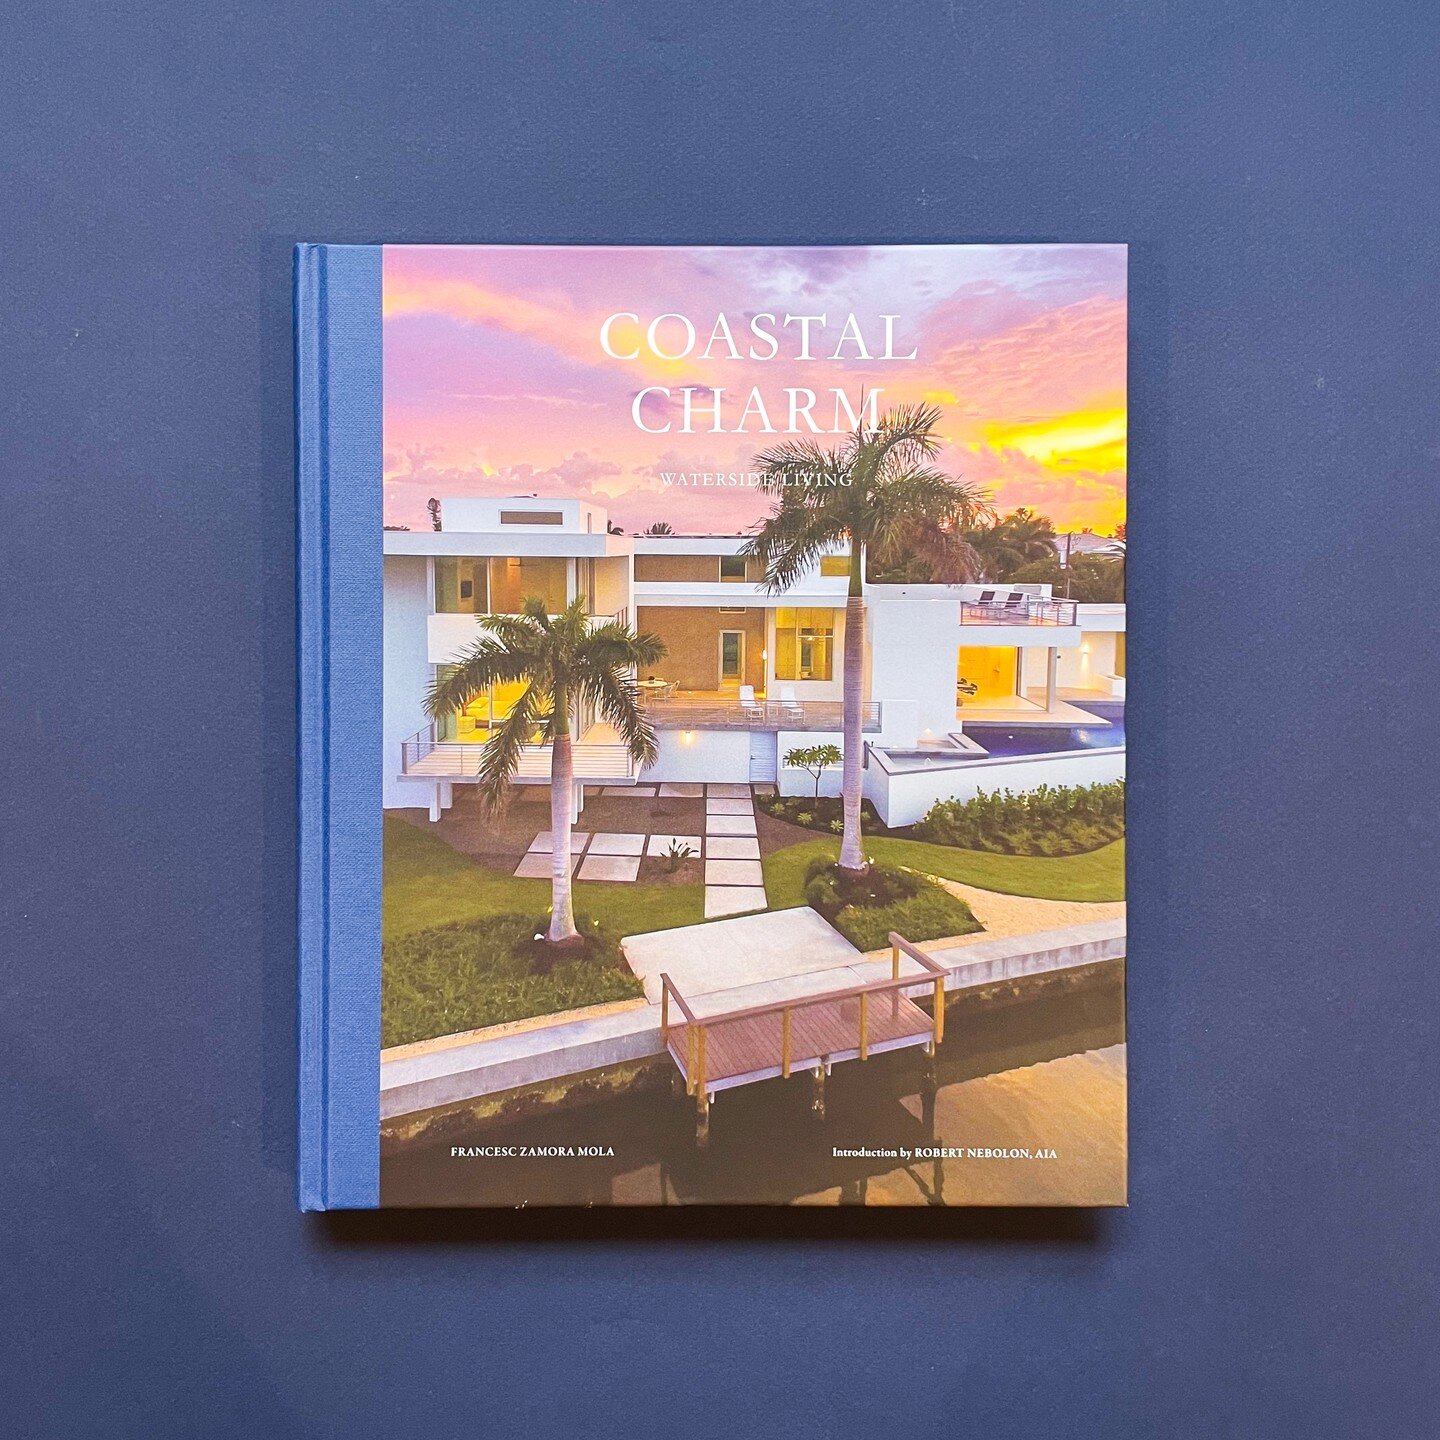 Coastal Charm: Waterside Living is a stunning collection of architecture and interior design, showcasing some of the most beautiful coastal homes from around the world. 

From beachfront villas to cliff-top retreats, this book offers a comprehensive 